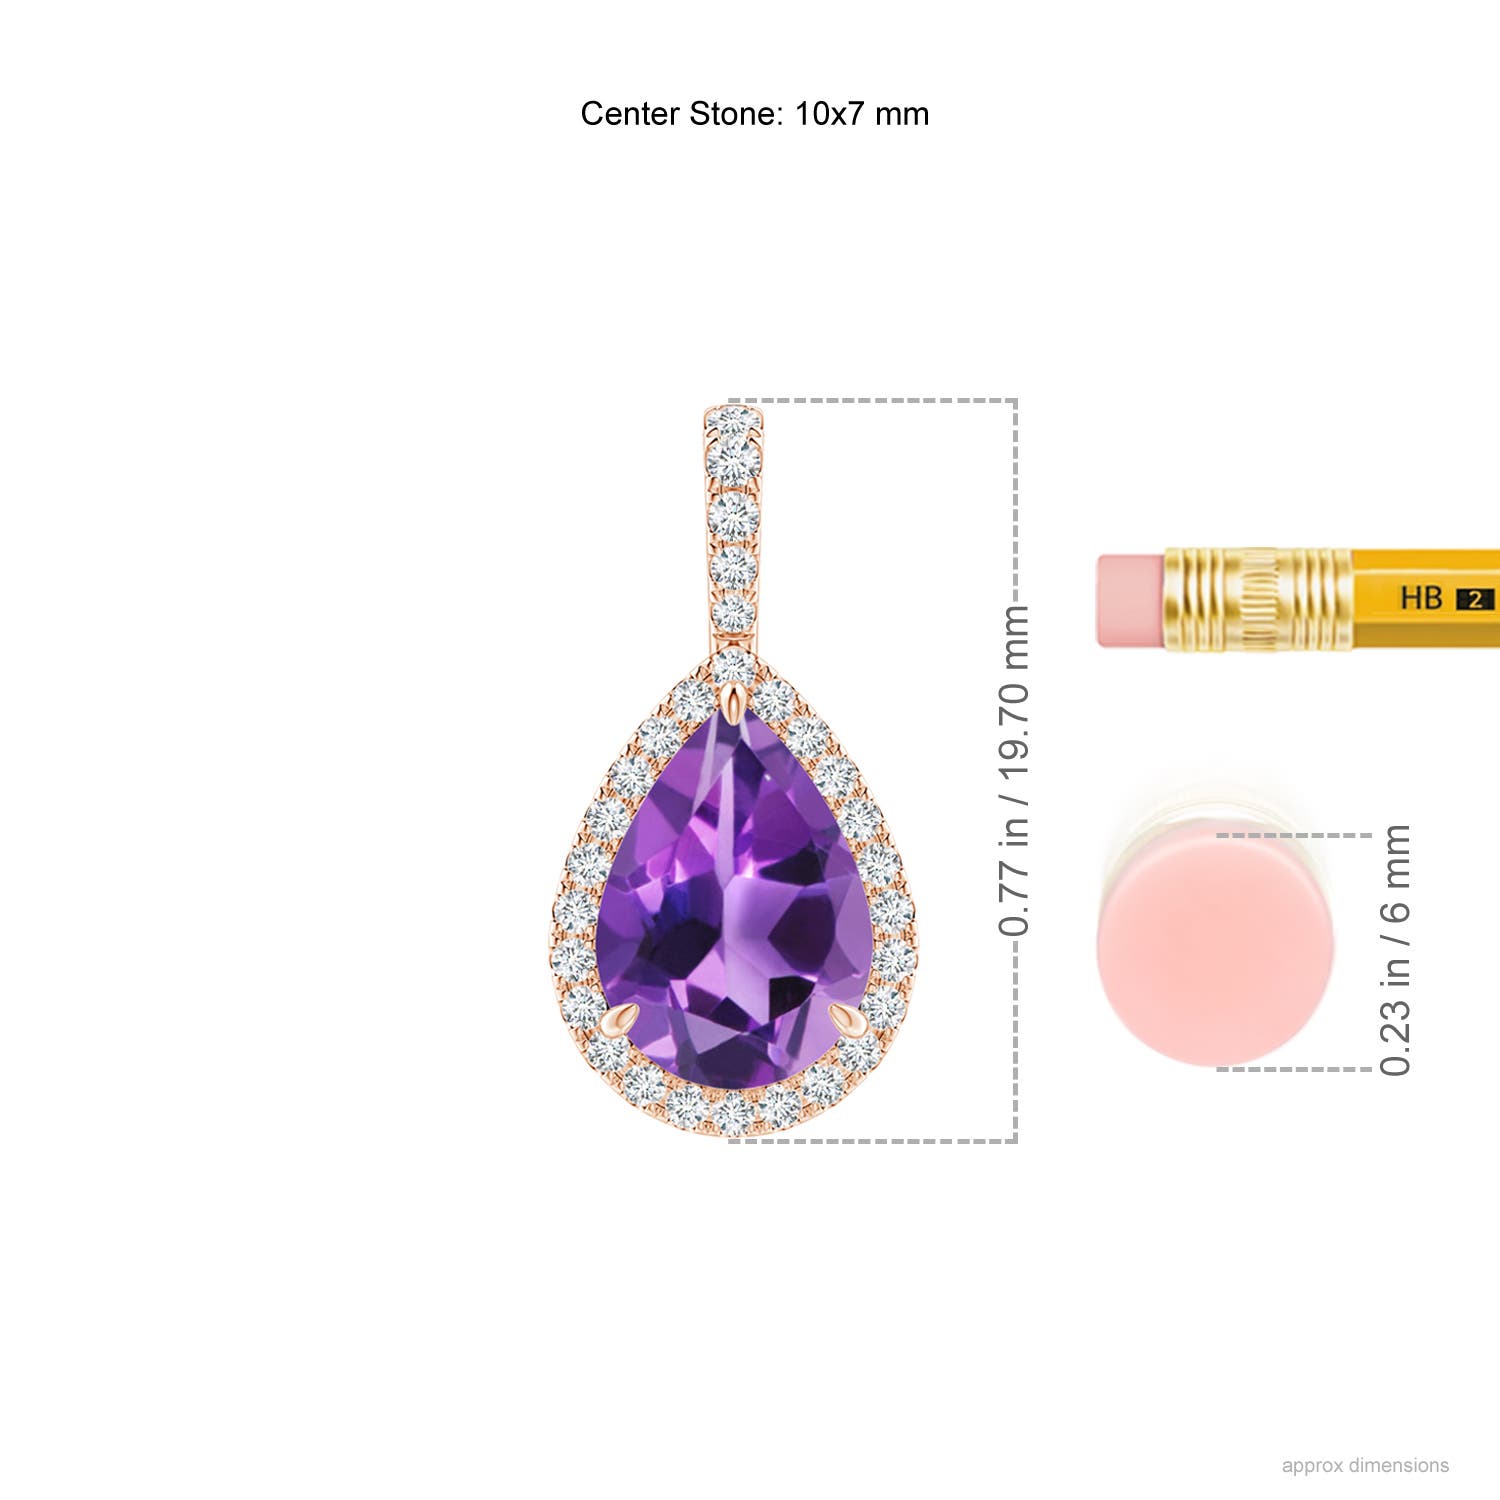 AAA - Amethyst / 1.78 CT / 14 KT Rose Gold